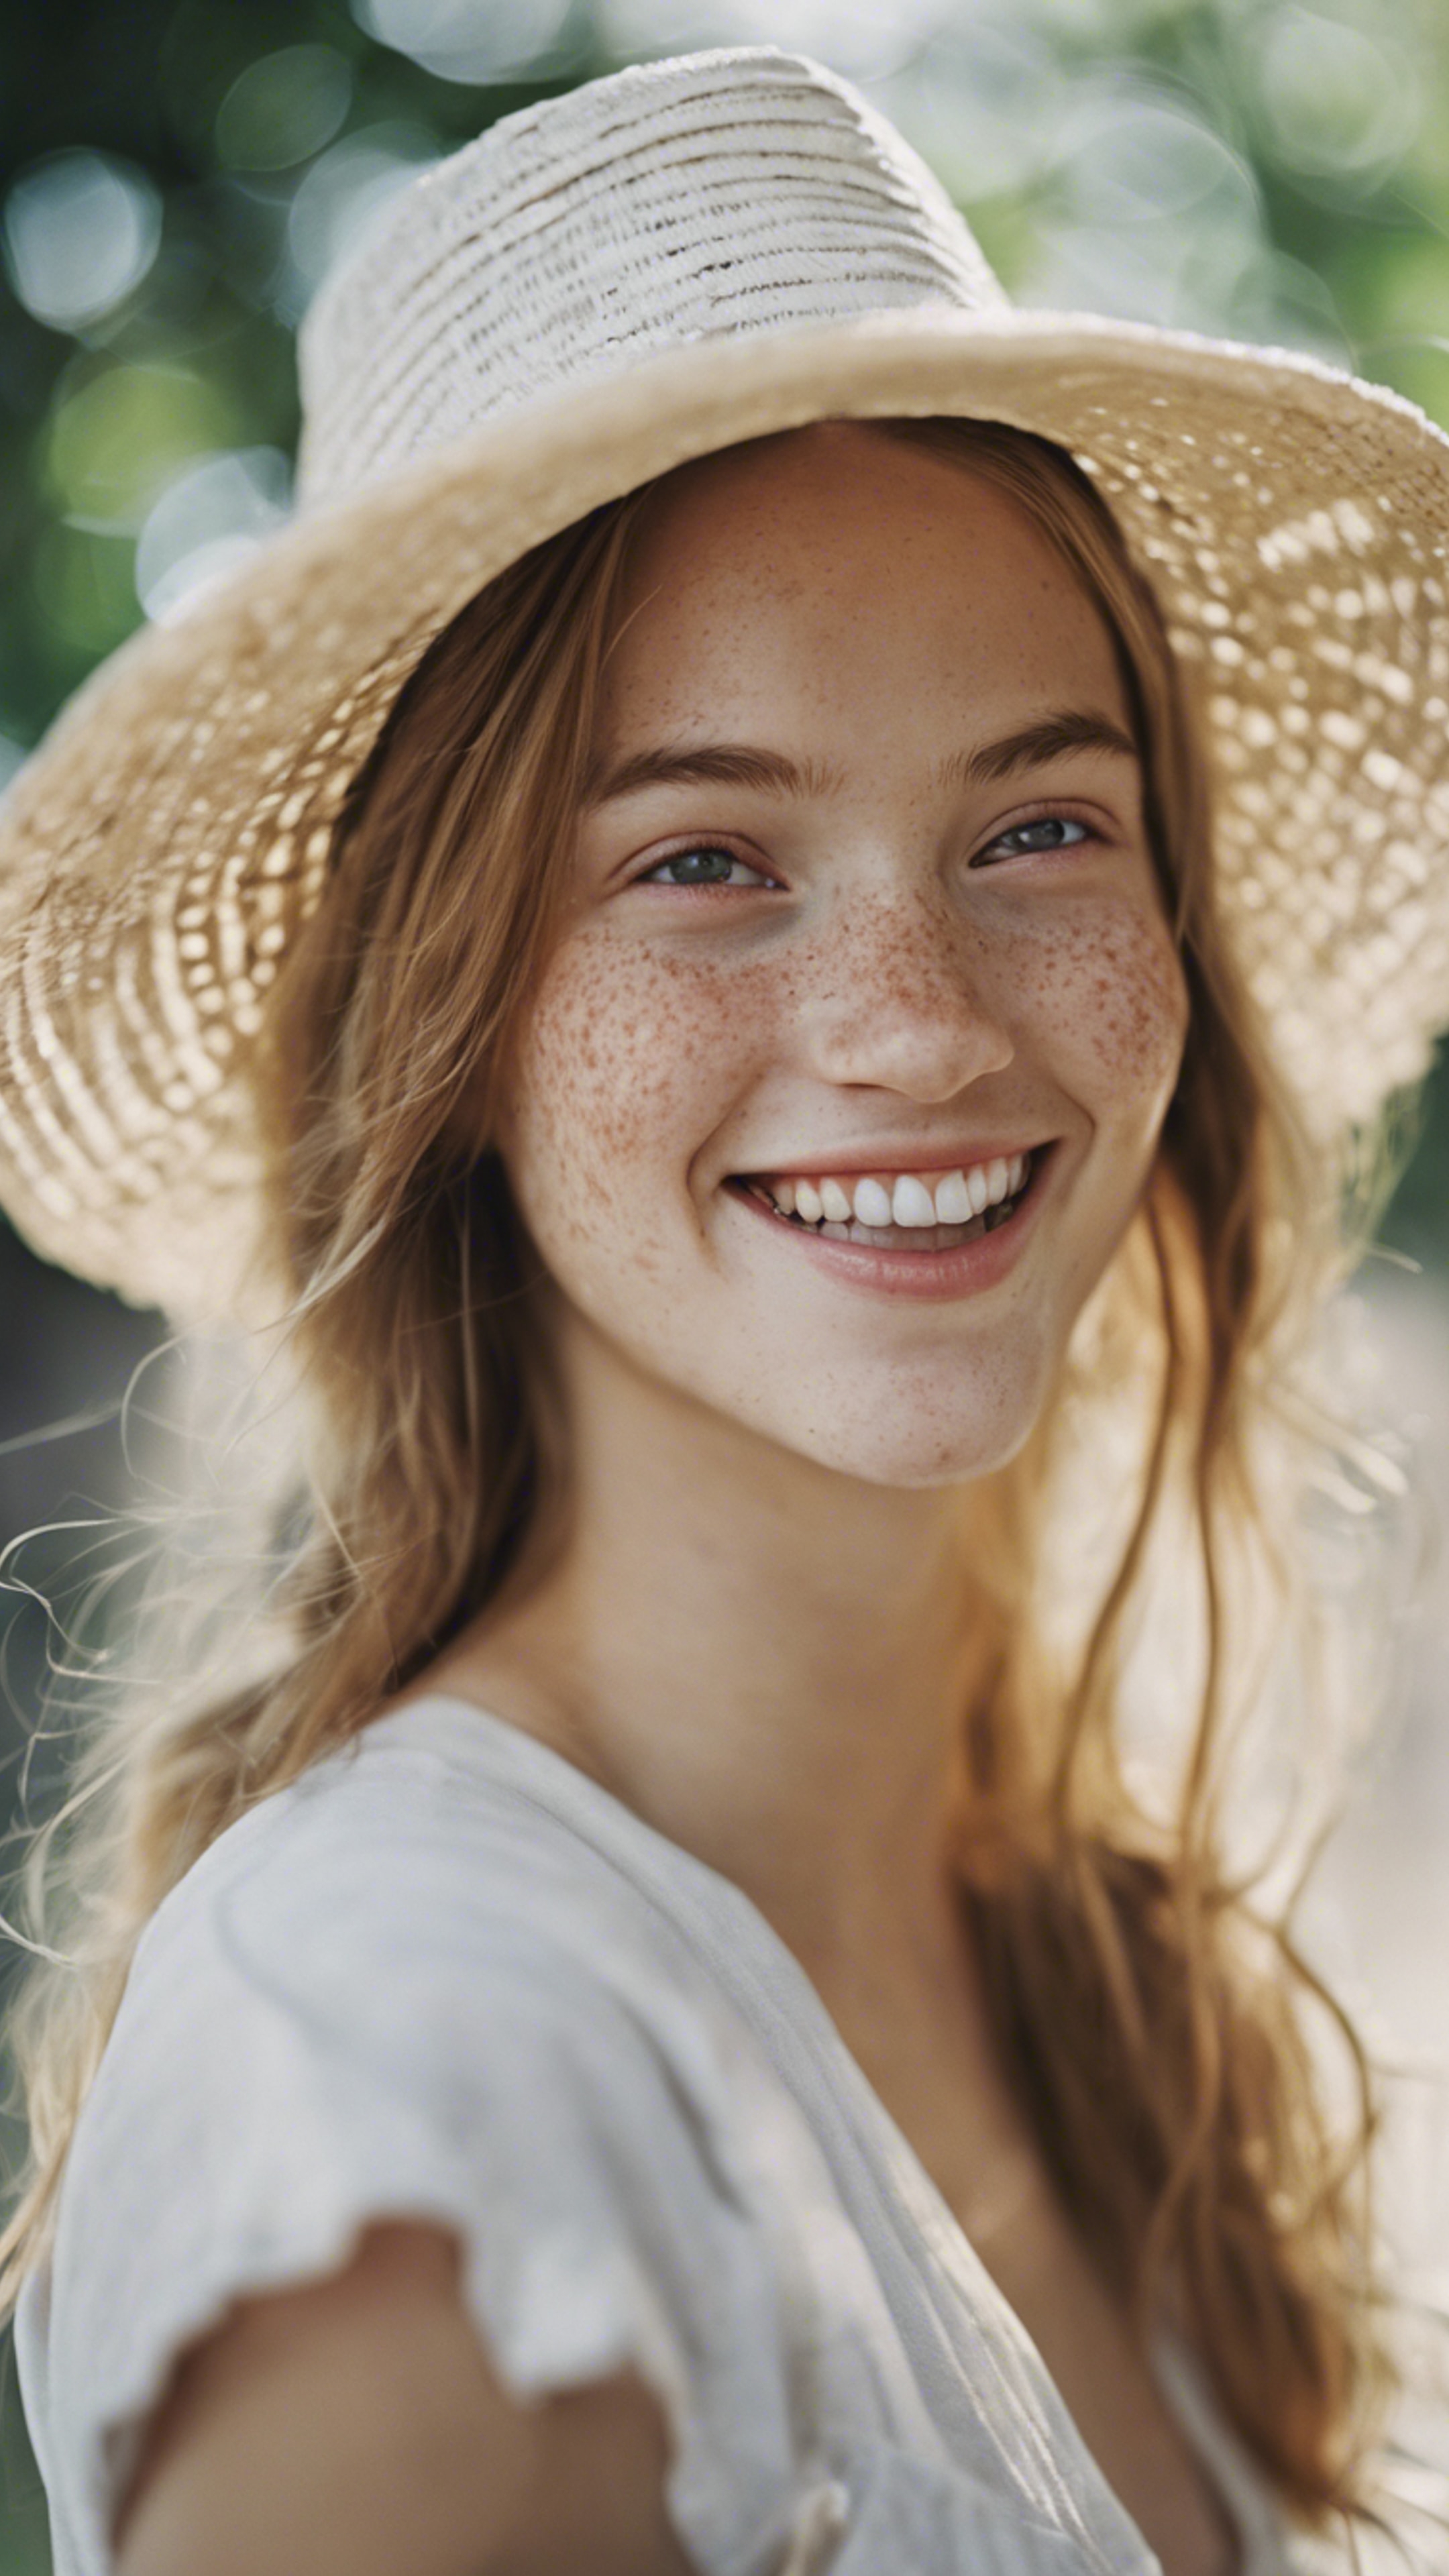 A portrait of a cute girl with freckles and a big smile, wearing a white straw hat. Ფონი[344e43c9fe594ea98e55]